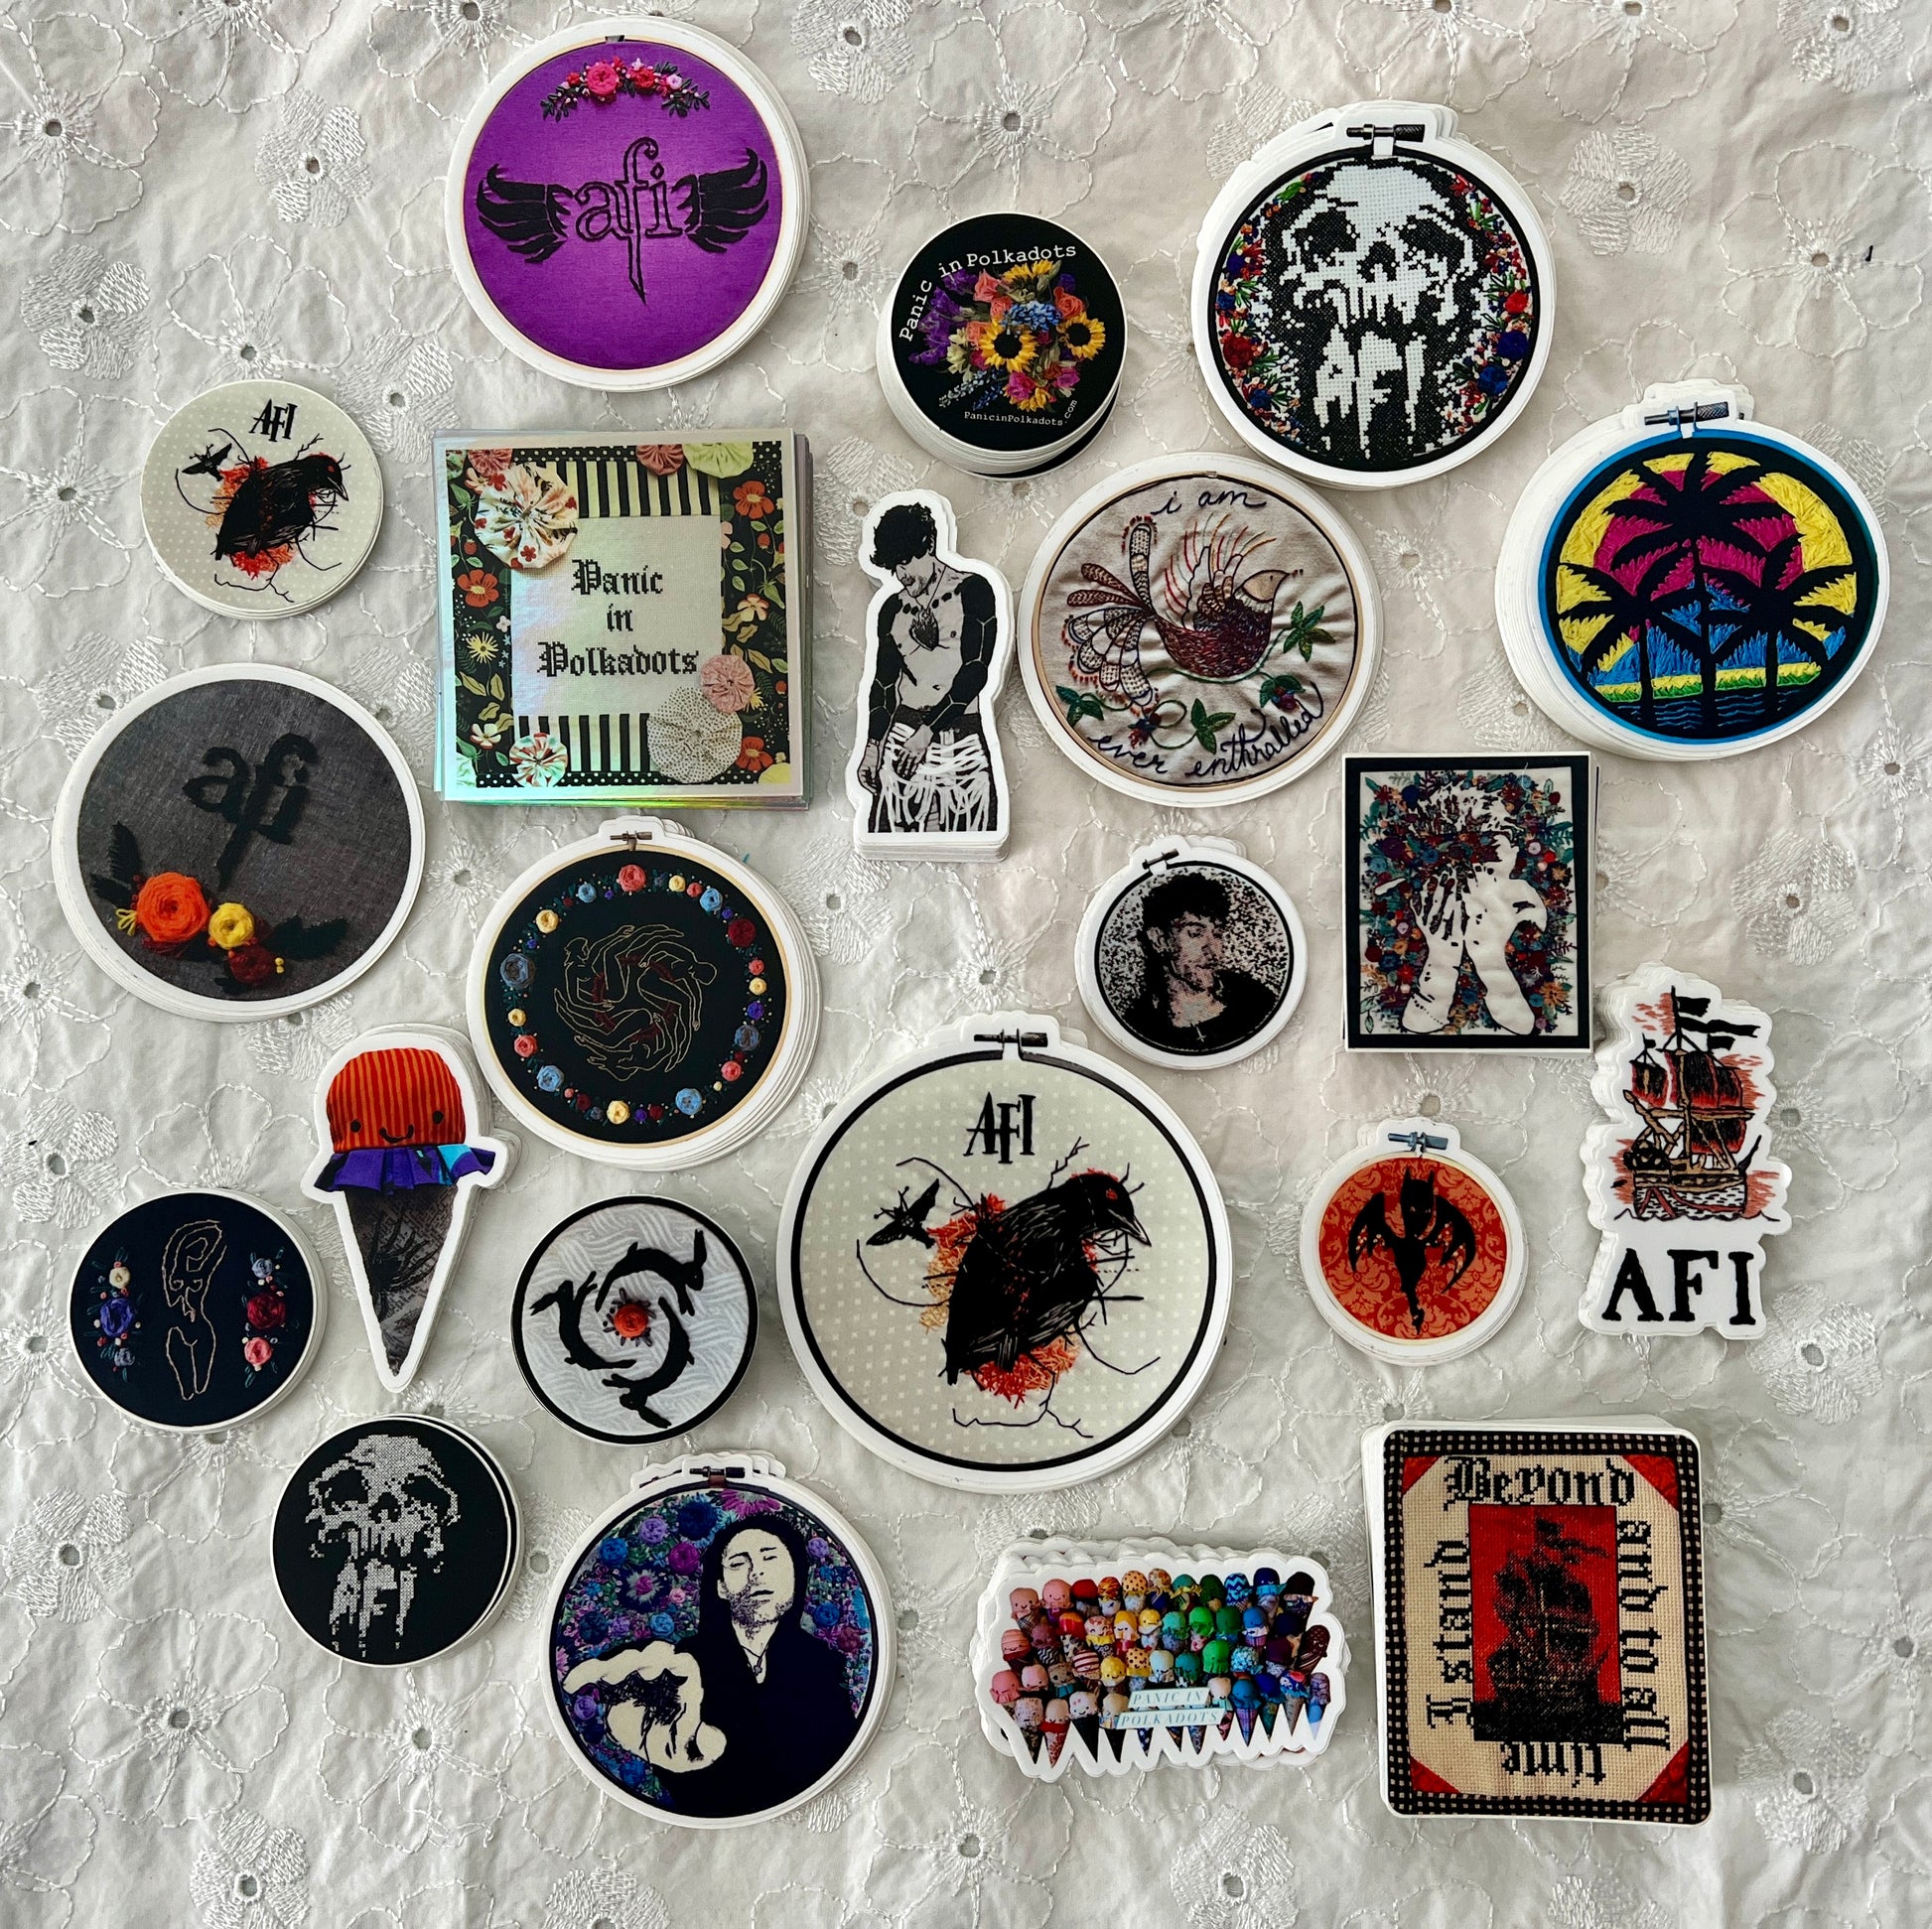 A group of various stickers, all designed by Panic in Polkadots, mostly AFI, Davey Havok, Blaqk Audio, and various lyrics